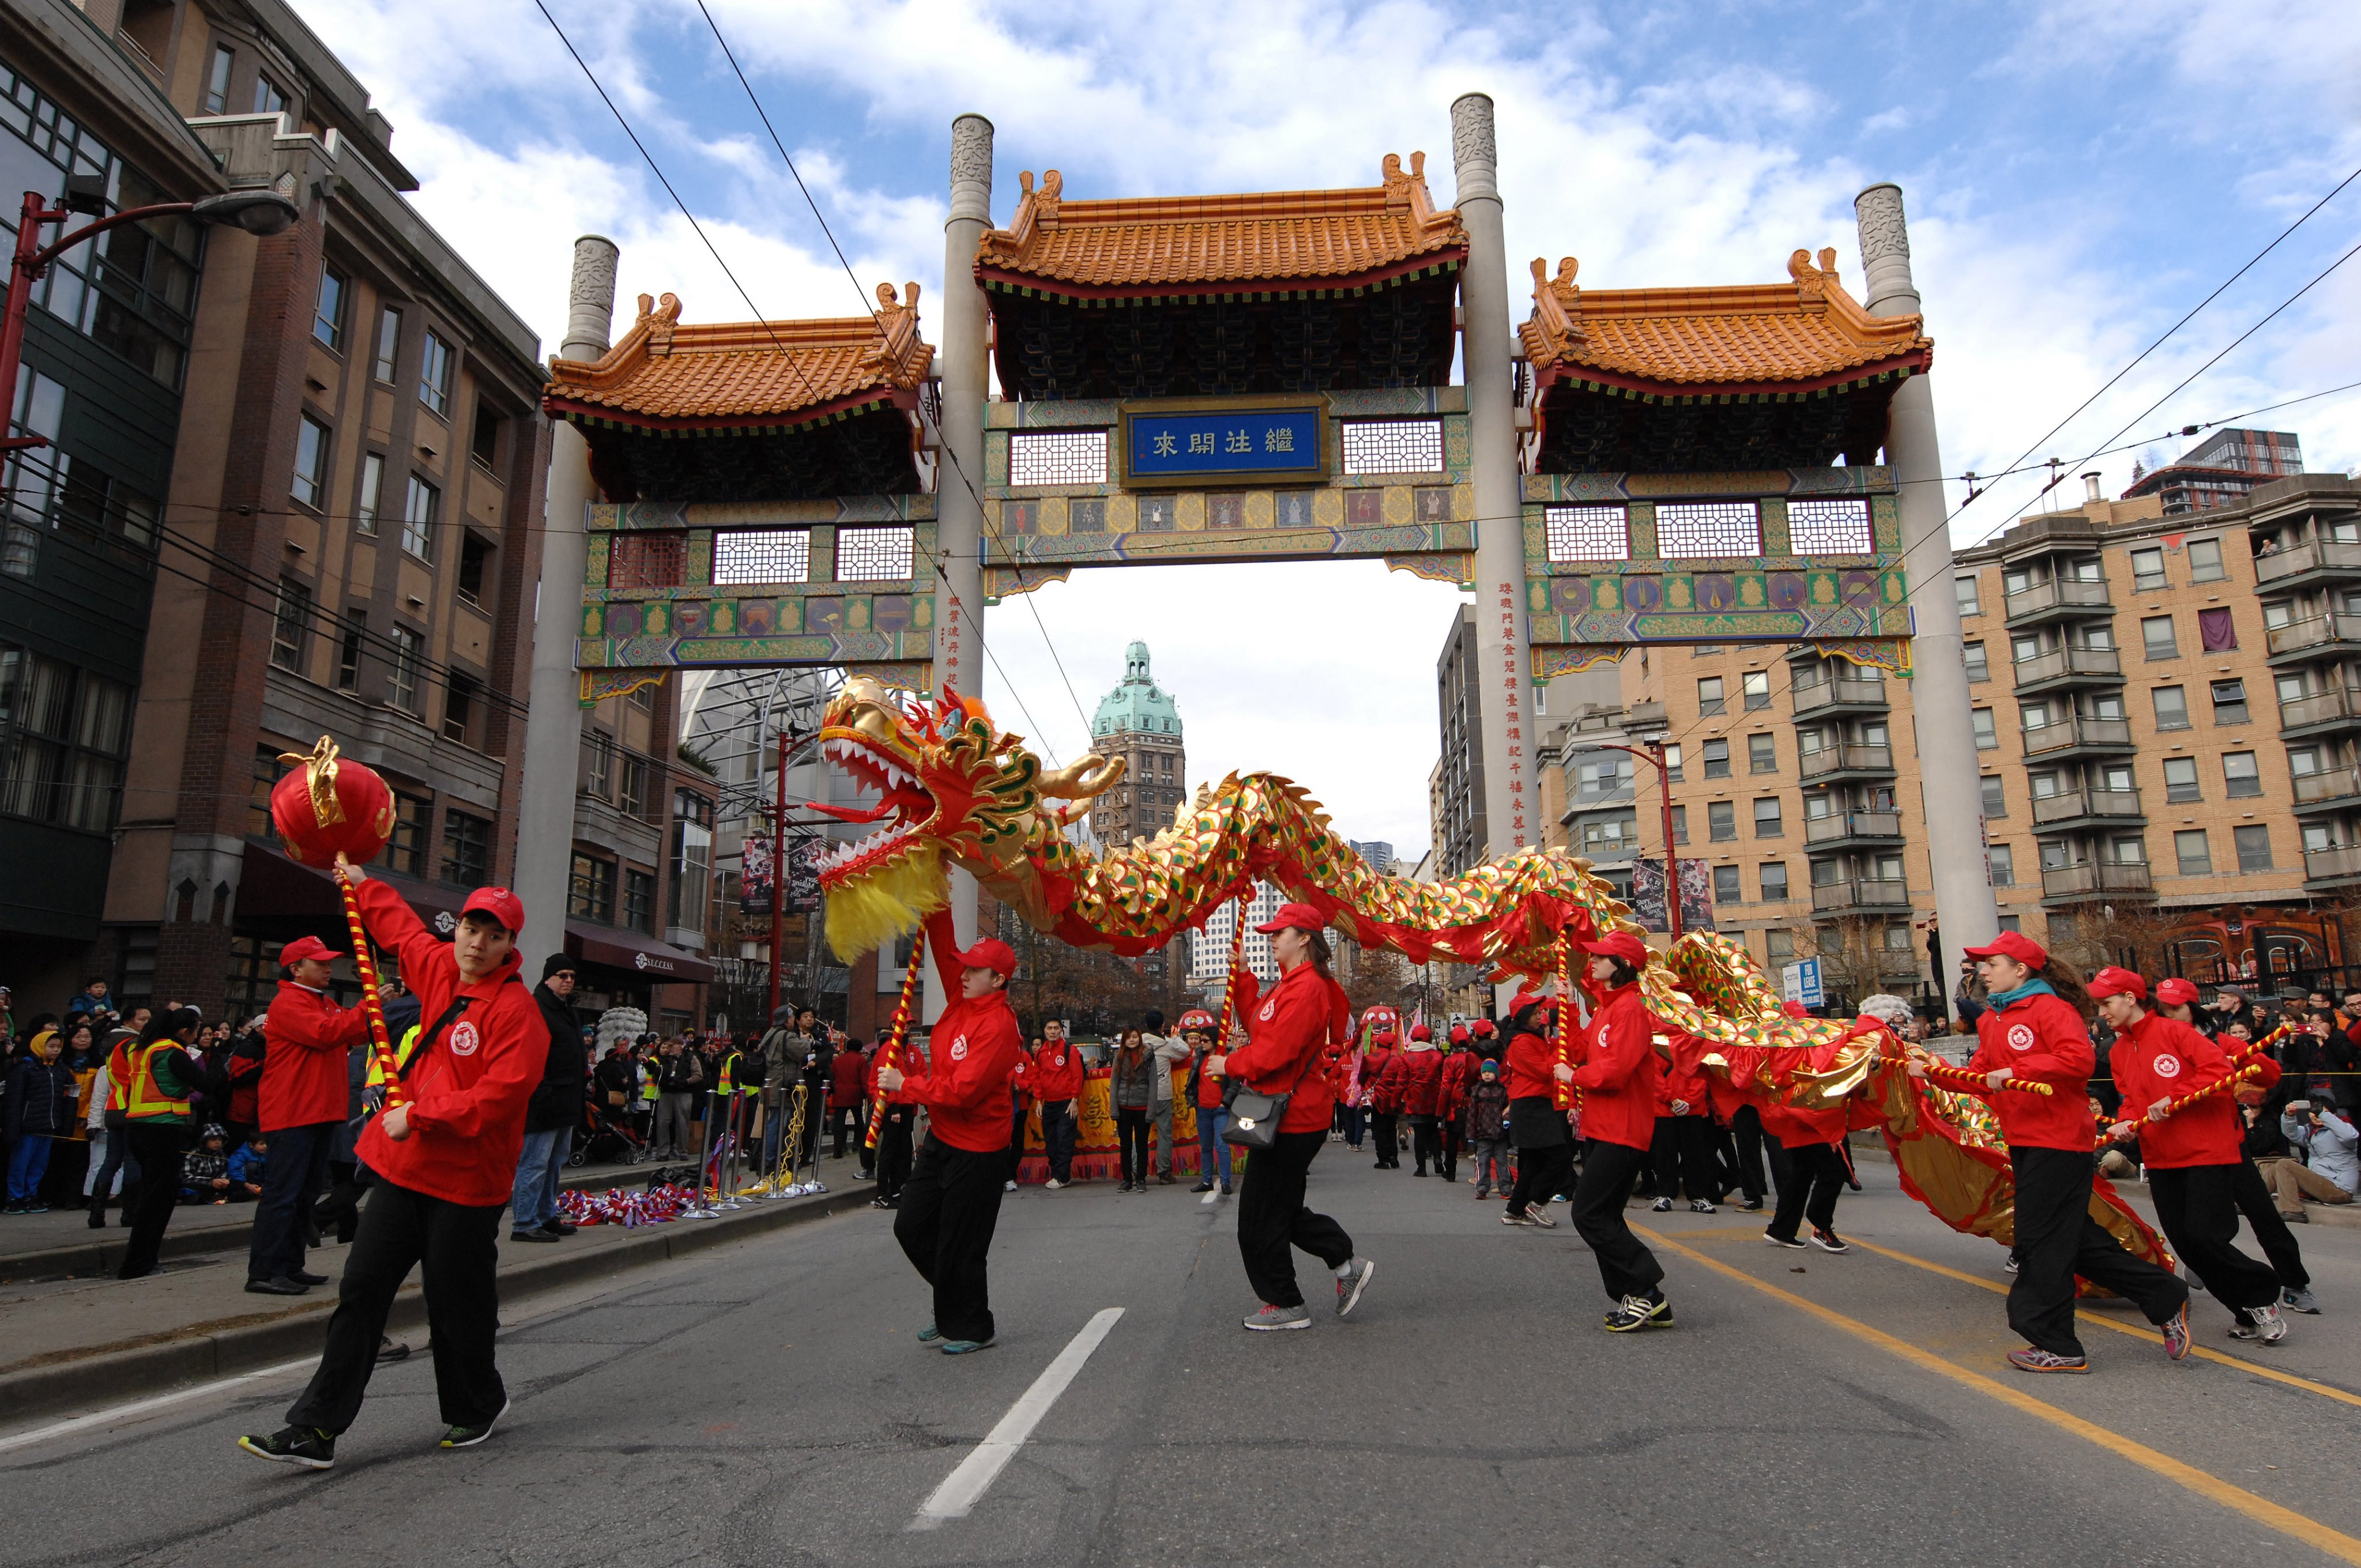 Dragon dancers take part in a Lunar New Year celebration in Vancouver, Canada, in this file photo. Canada’s Chinese communities have been targeted for espionage by the Overseas Chinese Affairs Office, according to a recent court ruling.  Photo: Xinhua